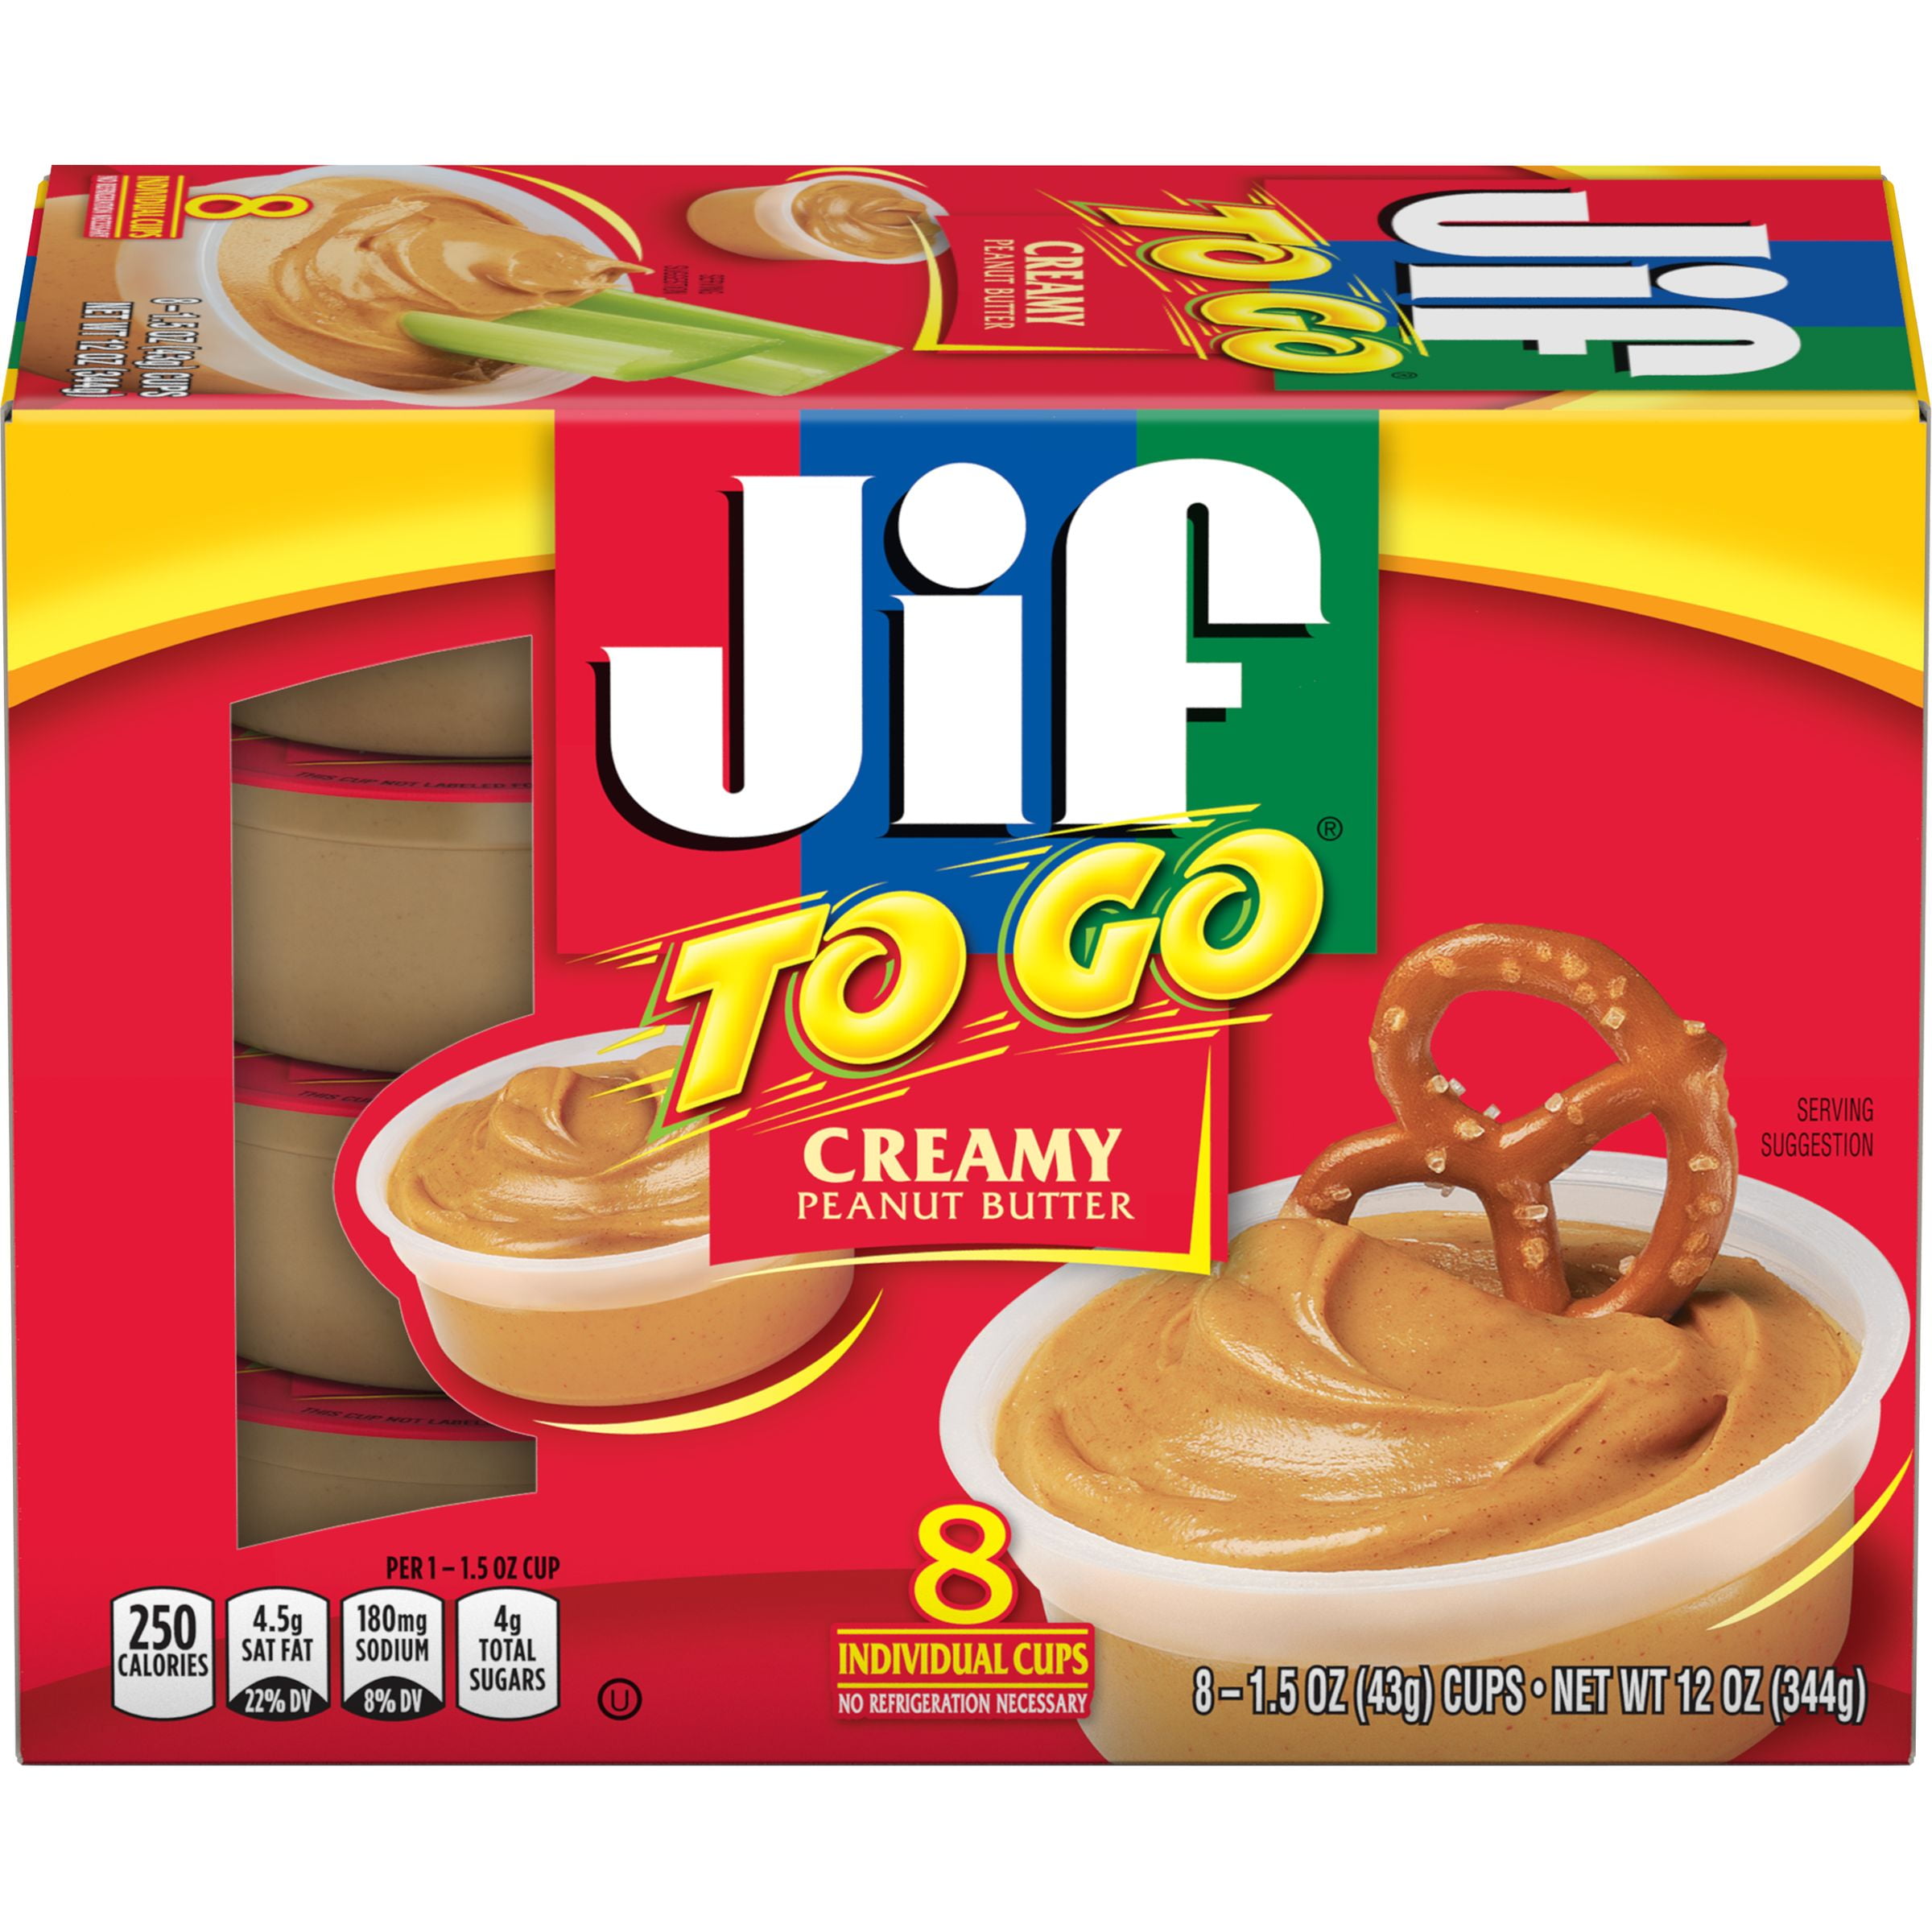 save-on-jif-to-go-peanut-butter-creamy-8-ct-order-online-delivery